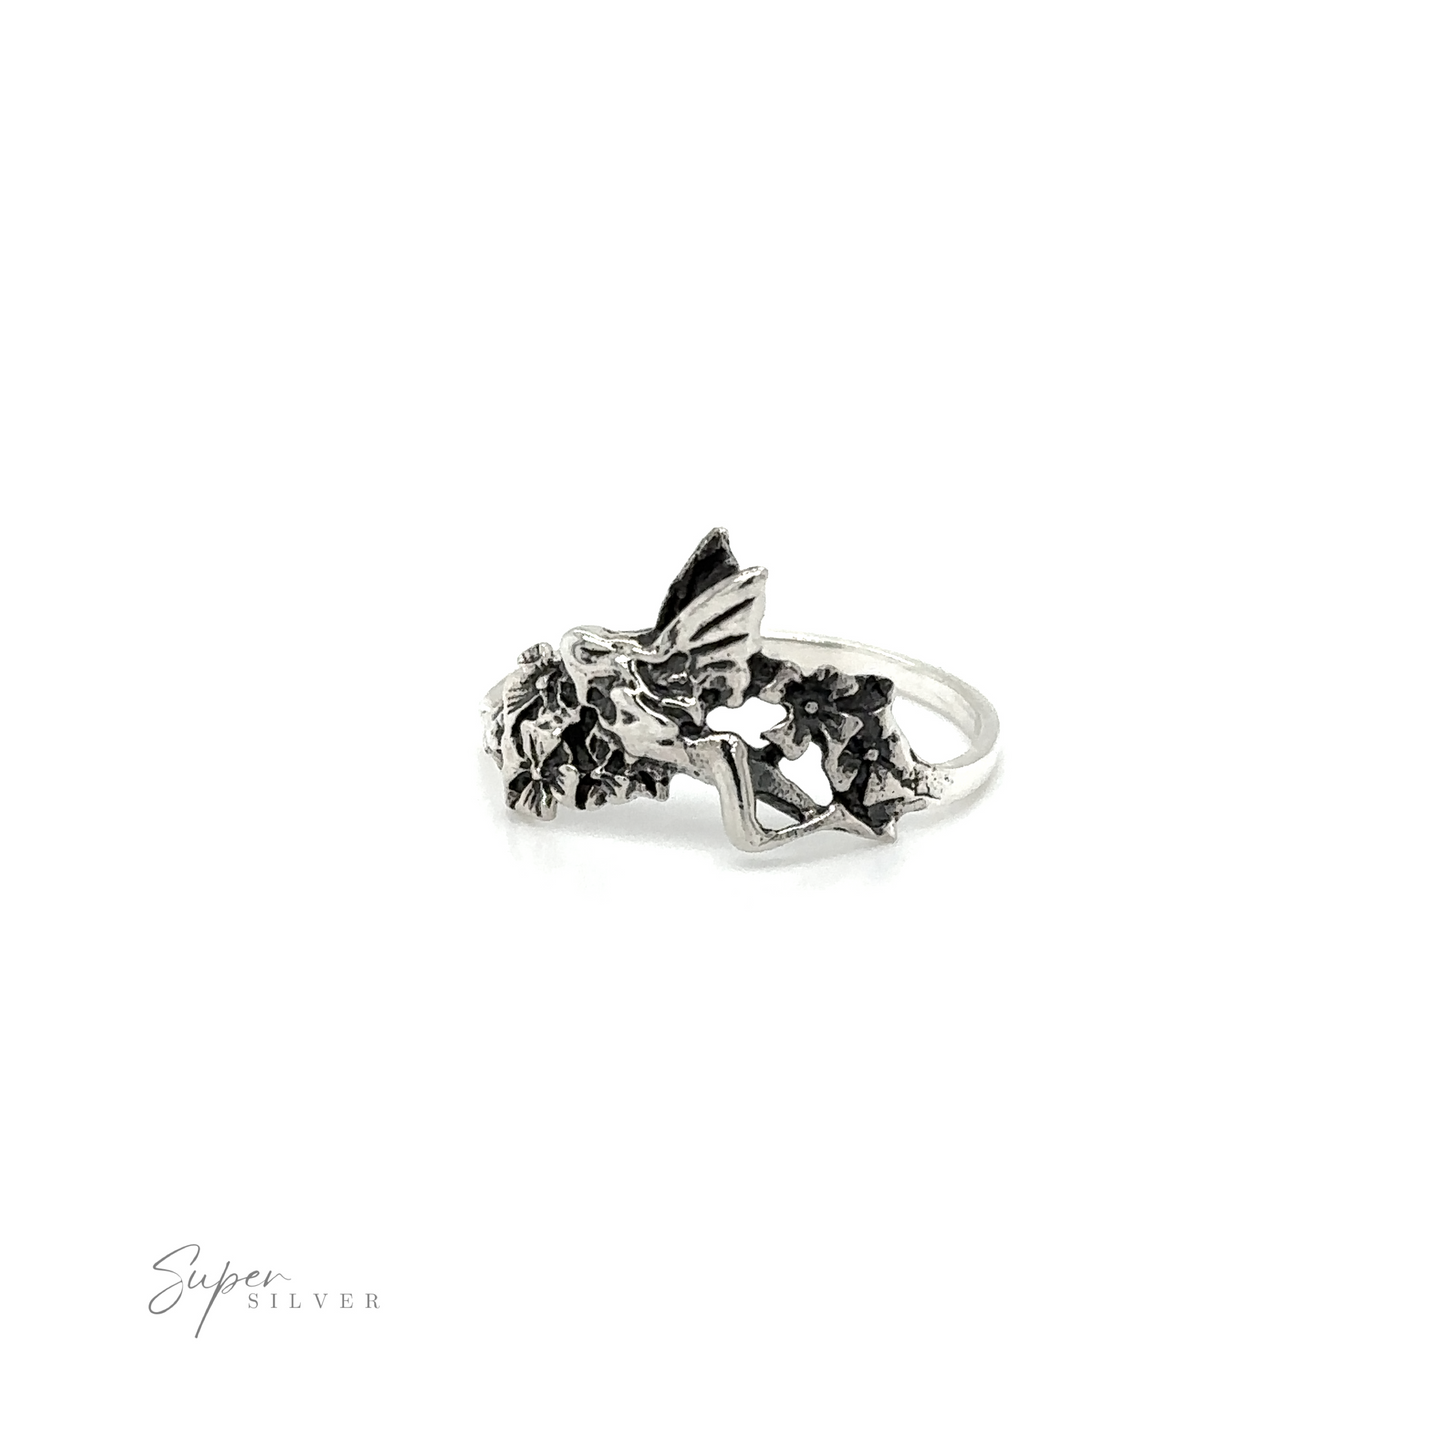 An enchanting Garden Fairy Ring with a floral charm.